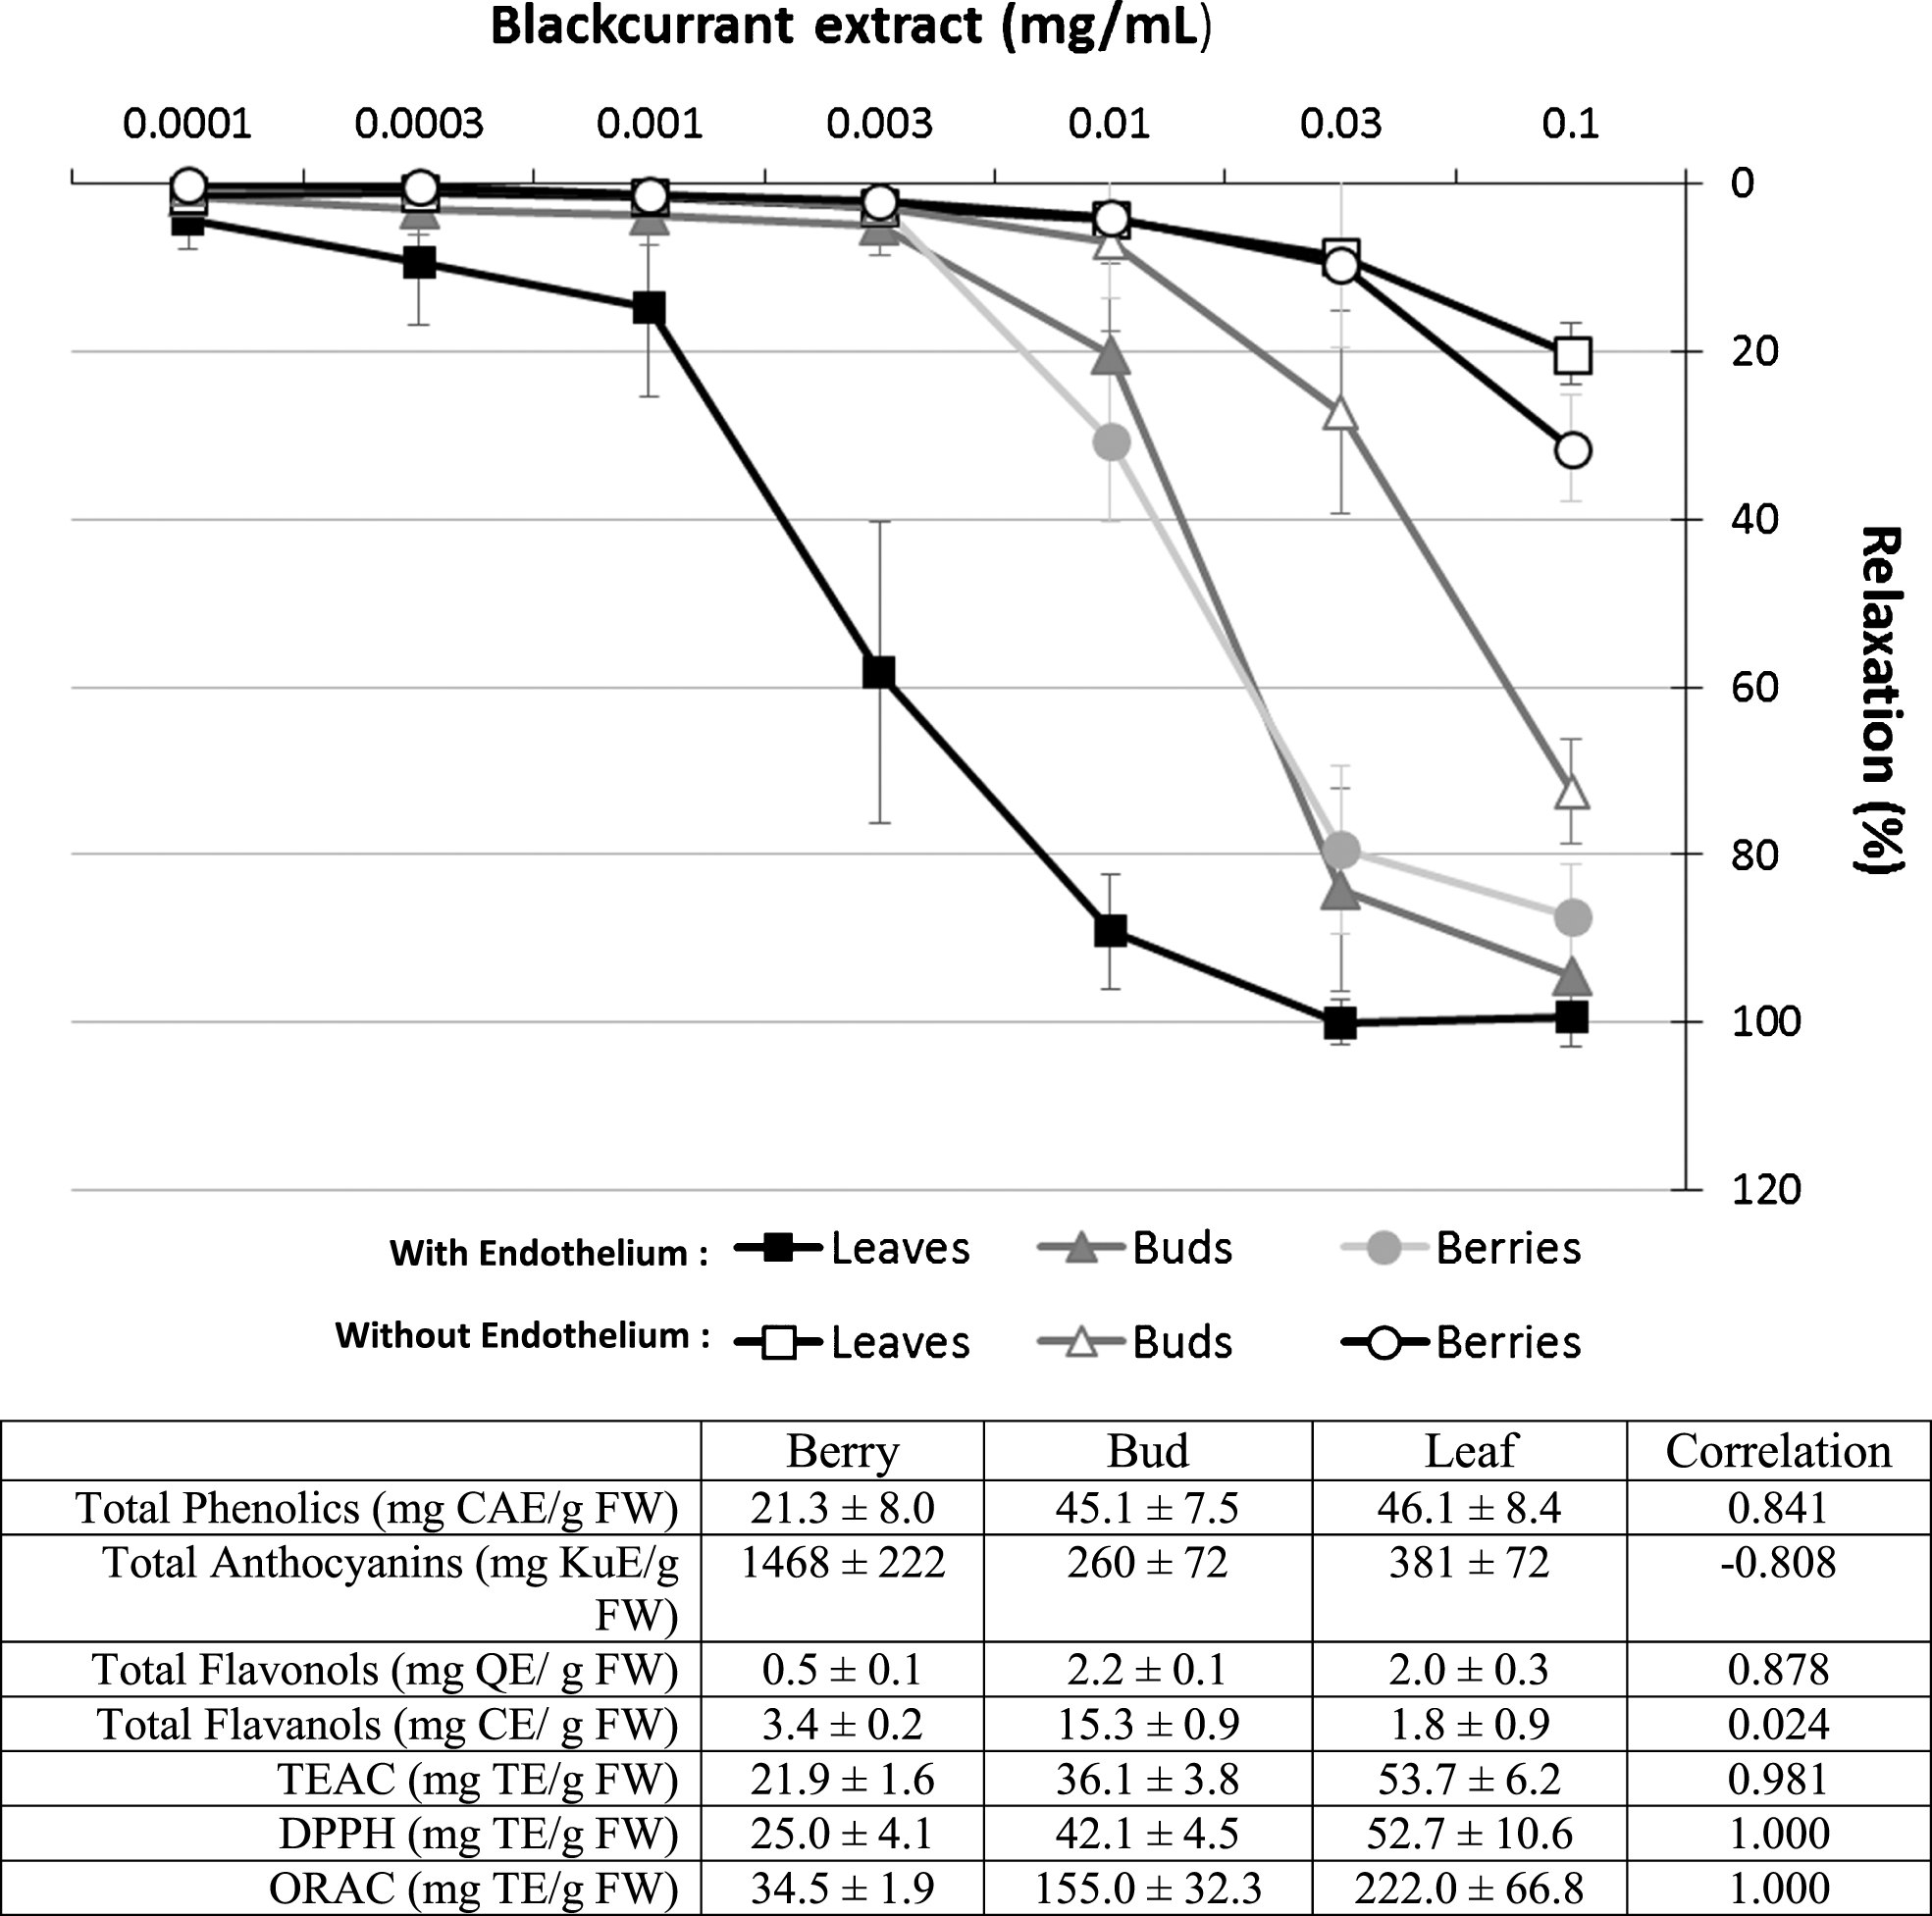 Characterisation of the relaxation induced by increasing concentrations of blackcurrant berry, bud or leaf extracts (0.0001 to 0.1 mg/mL) in porcine coronary artery rings with either an intact endothelium or without endothelium and precontracted with U46619. Data are shown as means±SD of 5 different experiments. The table annexed to the figure shows previous results published by our team reporting the content of various phenolic compounds [22] and the antioxidant capacity of extracts using three methods (TEAC, DPPH and ORAC assays, [14]). A correlation has been made between these results and the endothelium-dependent vasorelaxation results at 0.1 mg/mL of extract.